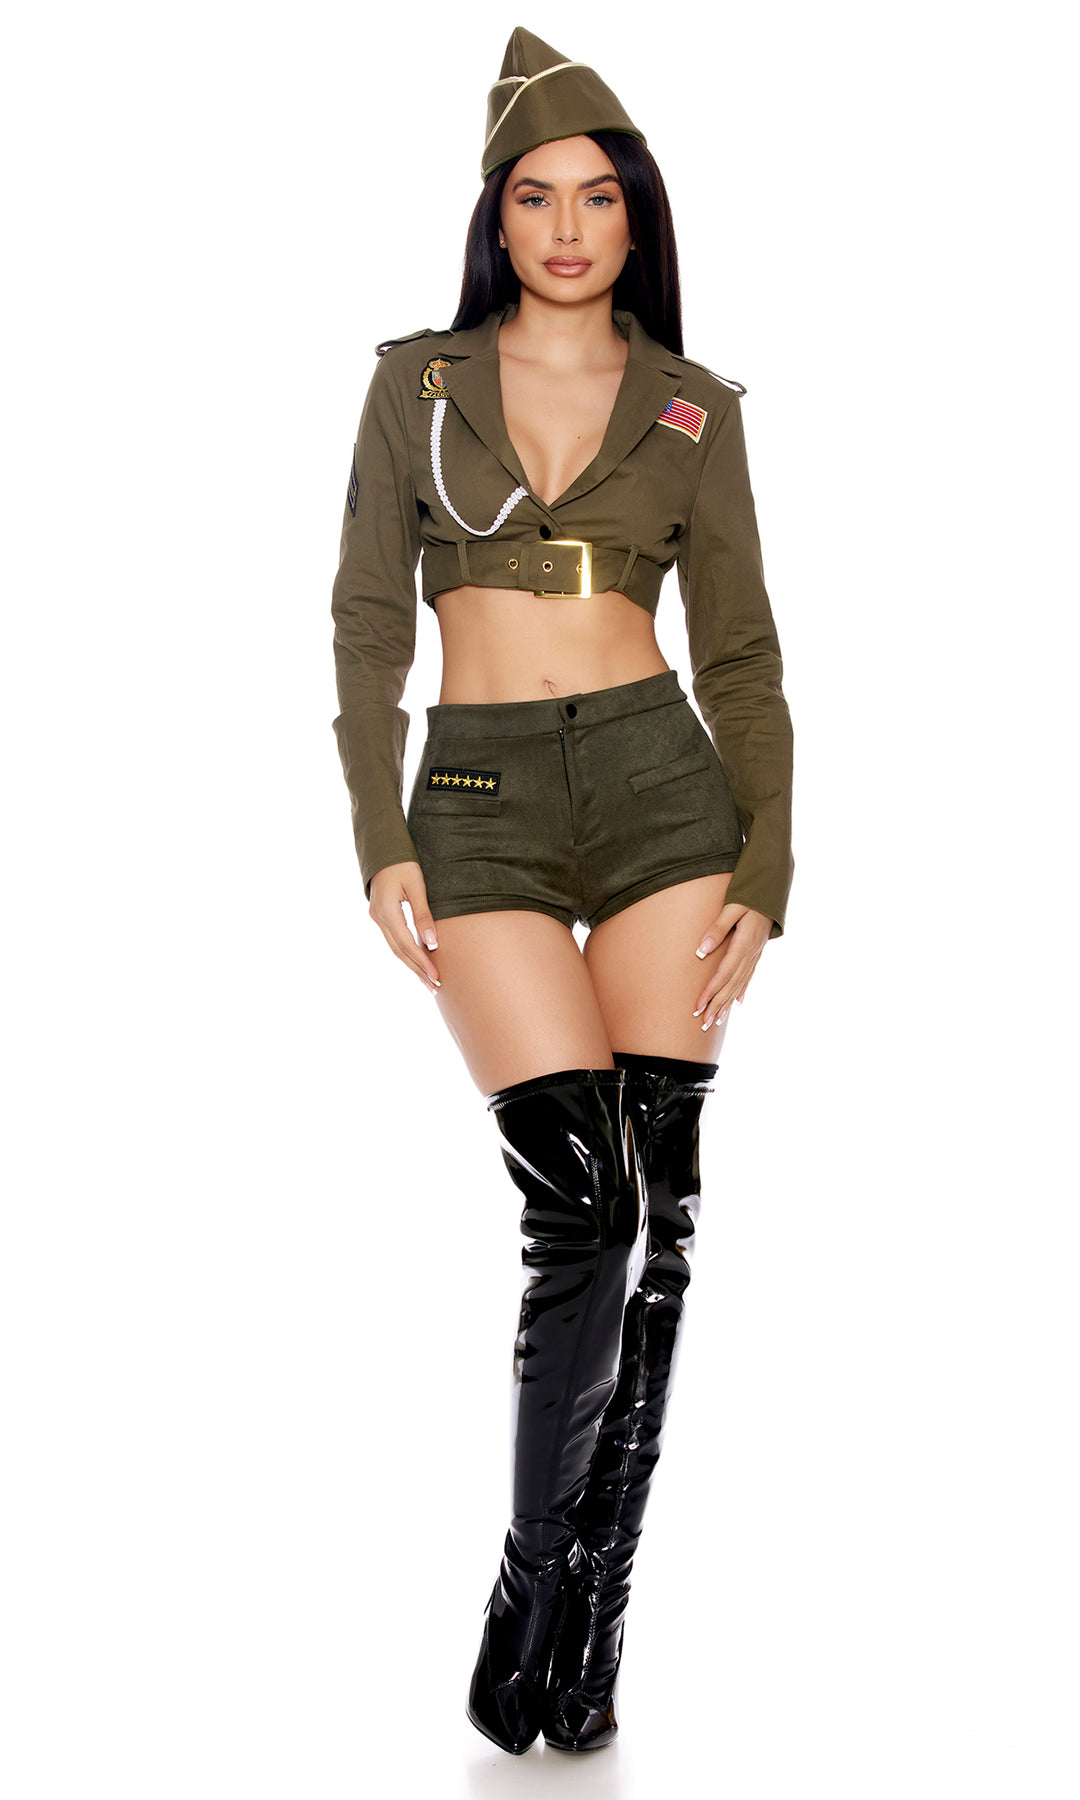 Command Attention Sexy Military Costume